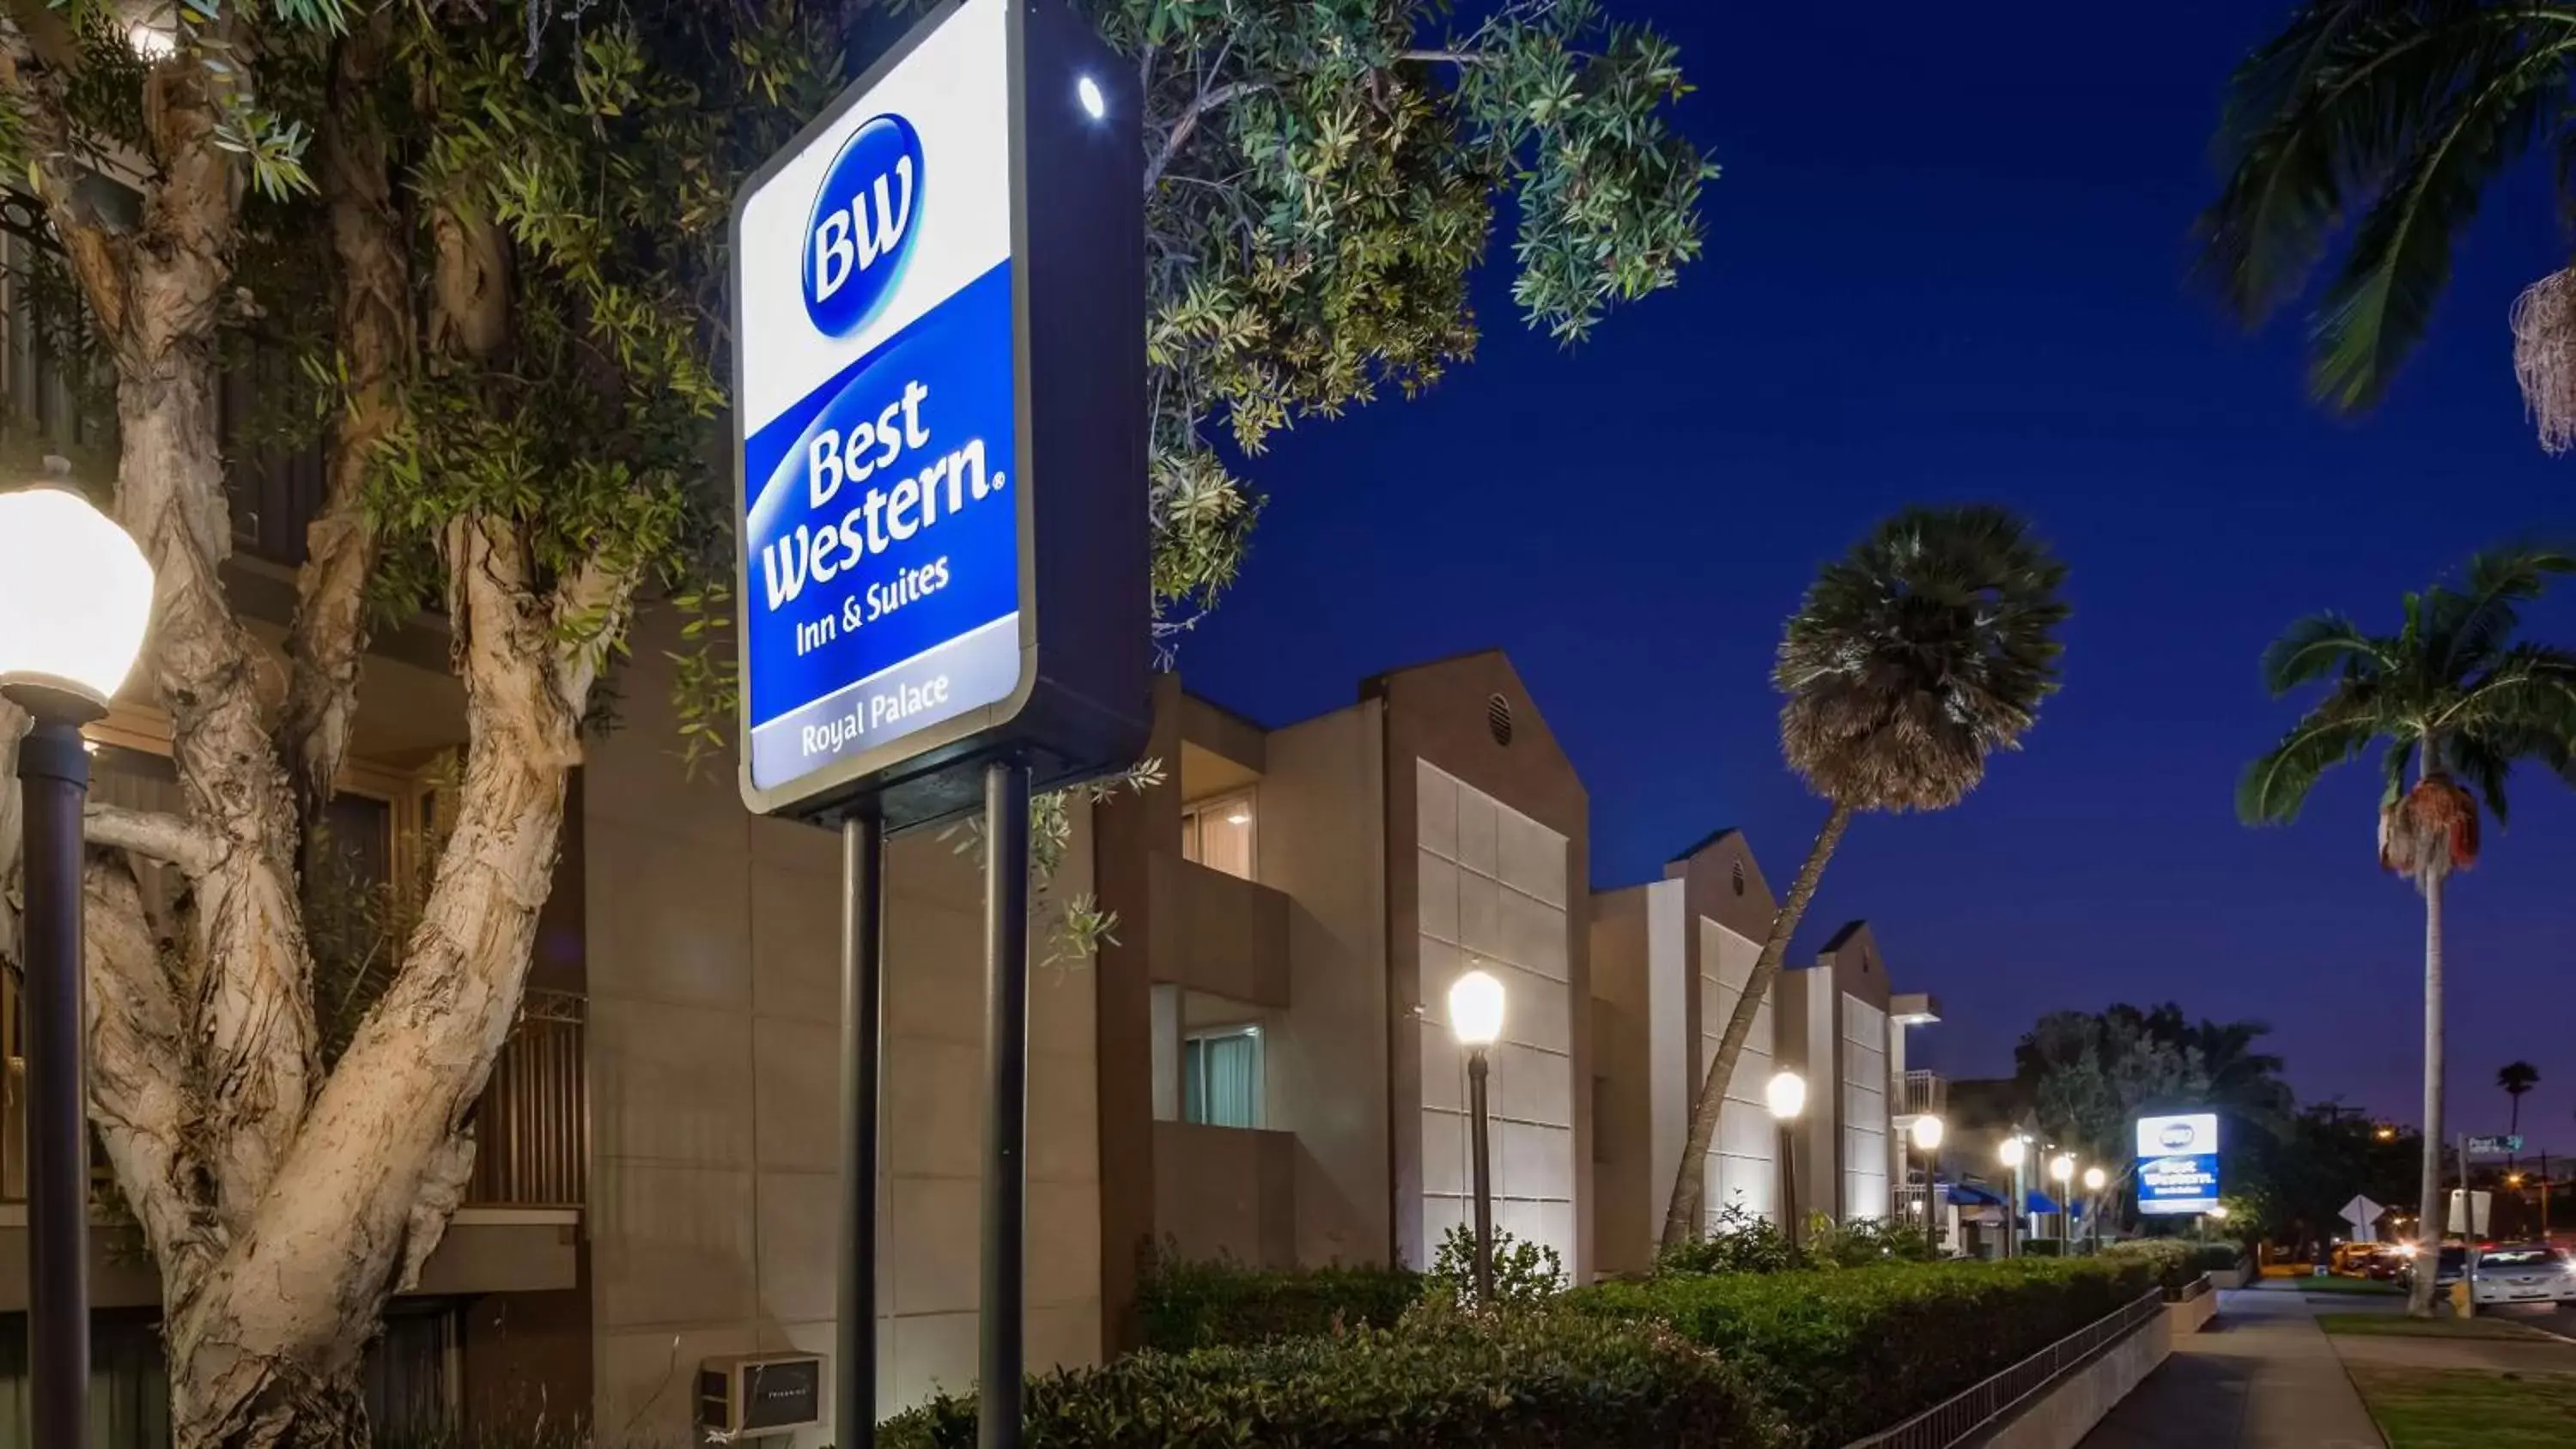 Property Building in Best Western Royal Palace Inn & Suites